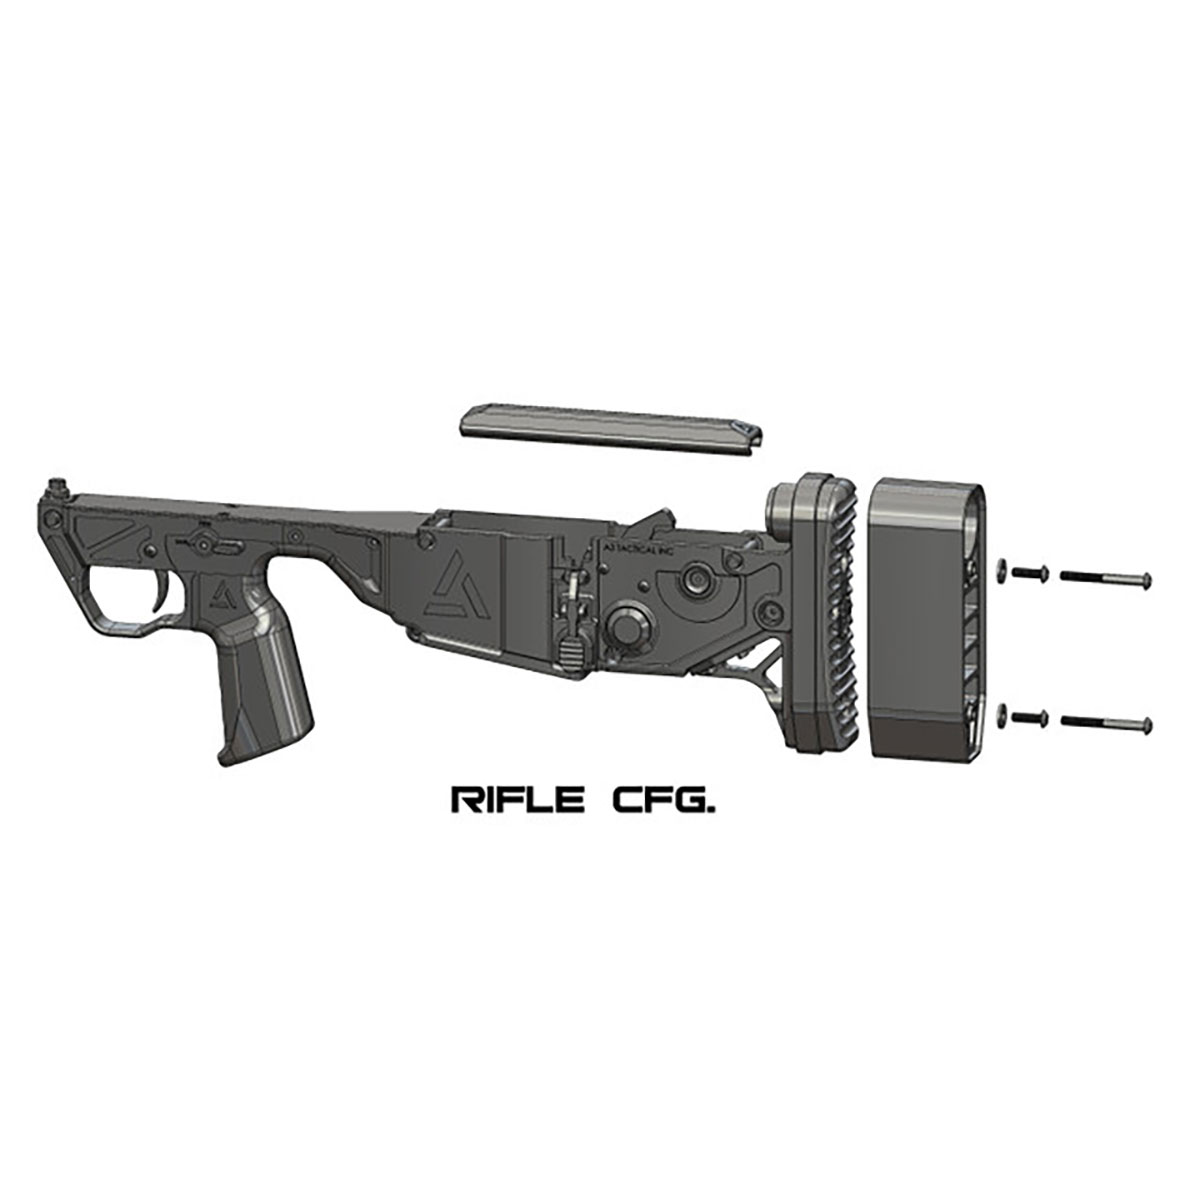 A3 TACTICAL - TRIAD BULLPUP CHASSIS for FOXTROT MIKES UPPER RECEIVER RIFLE